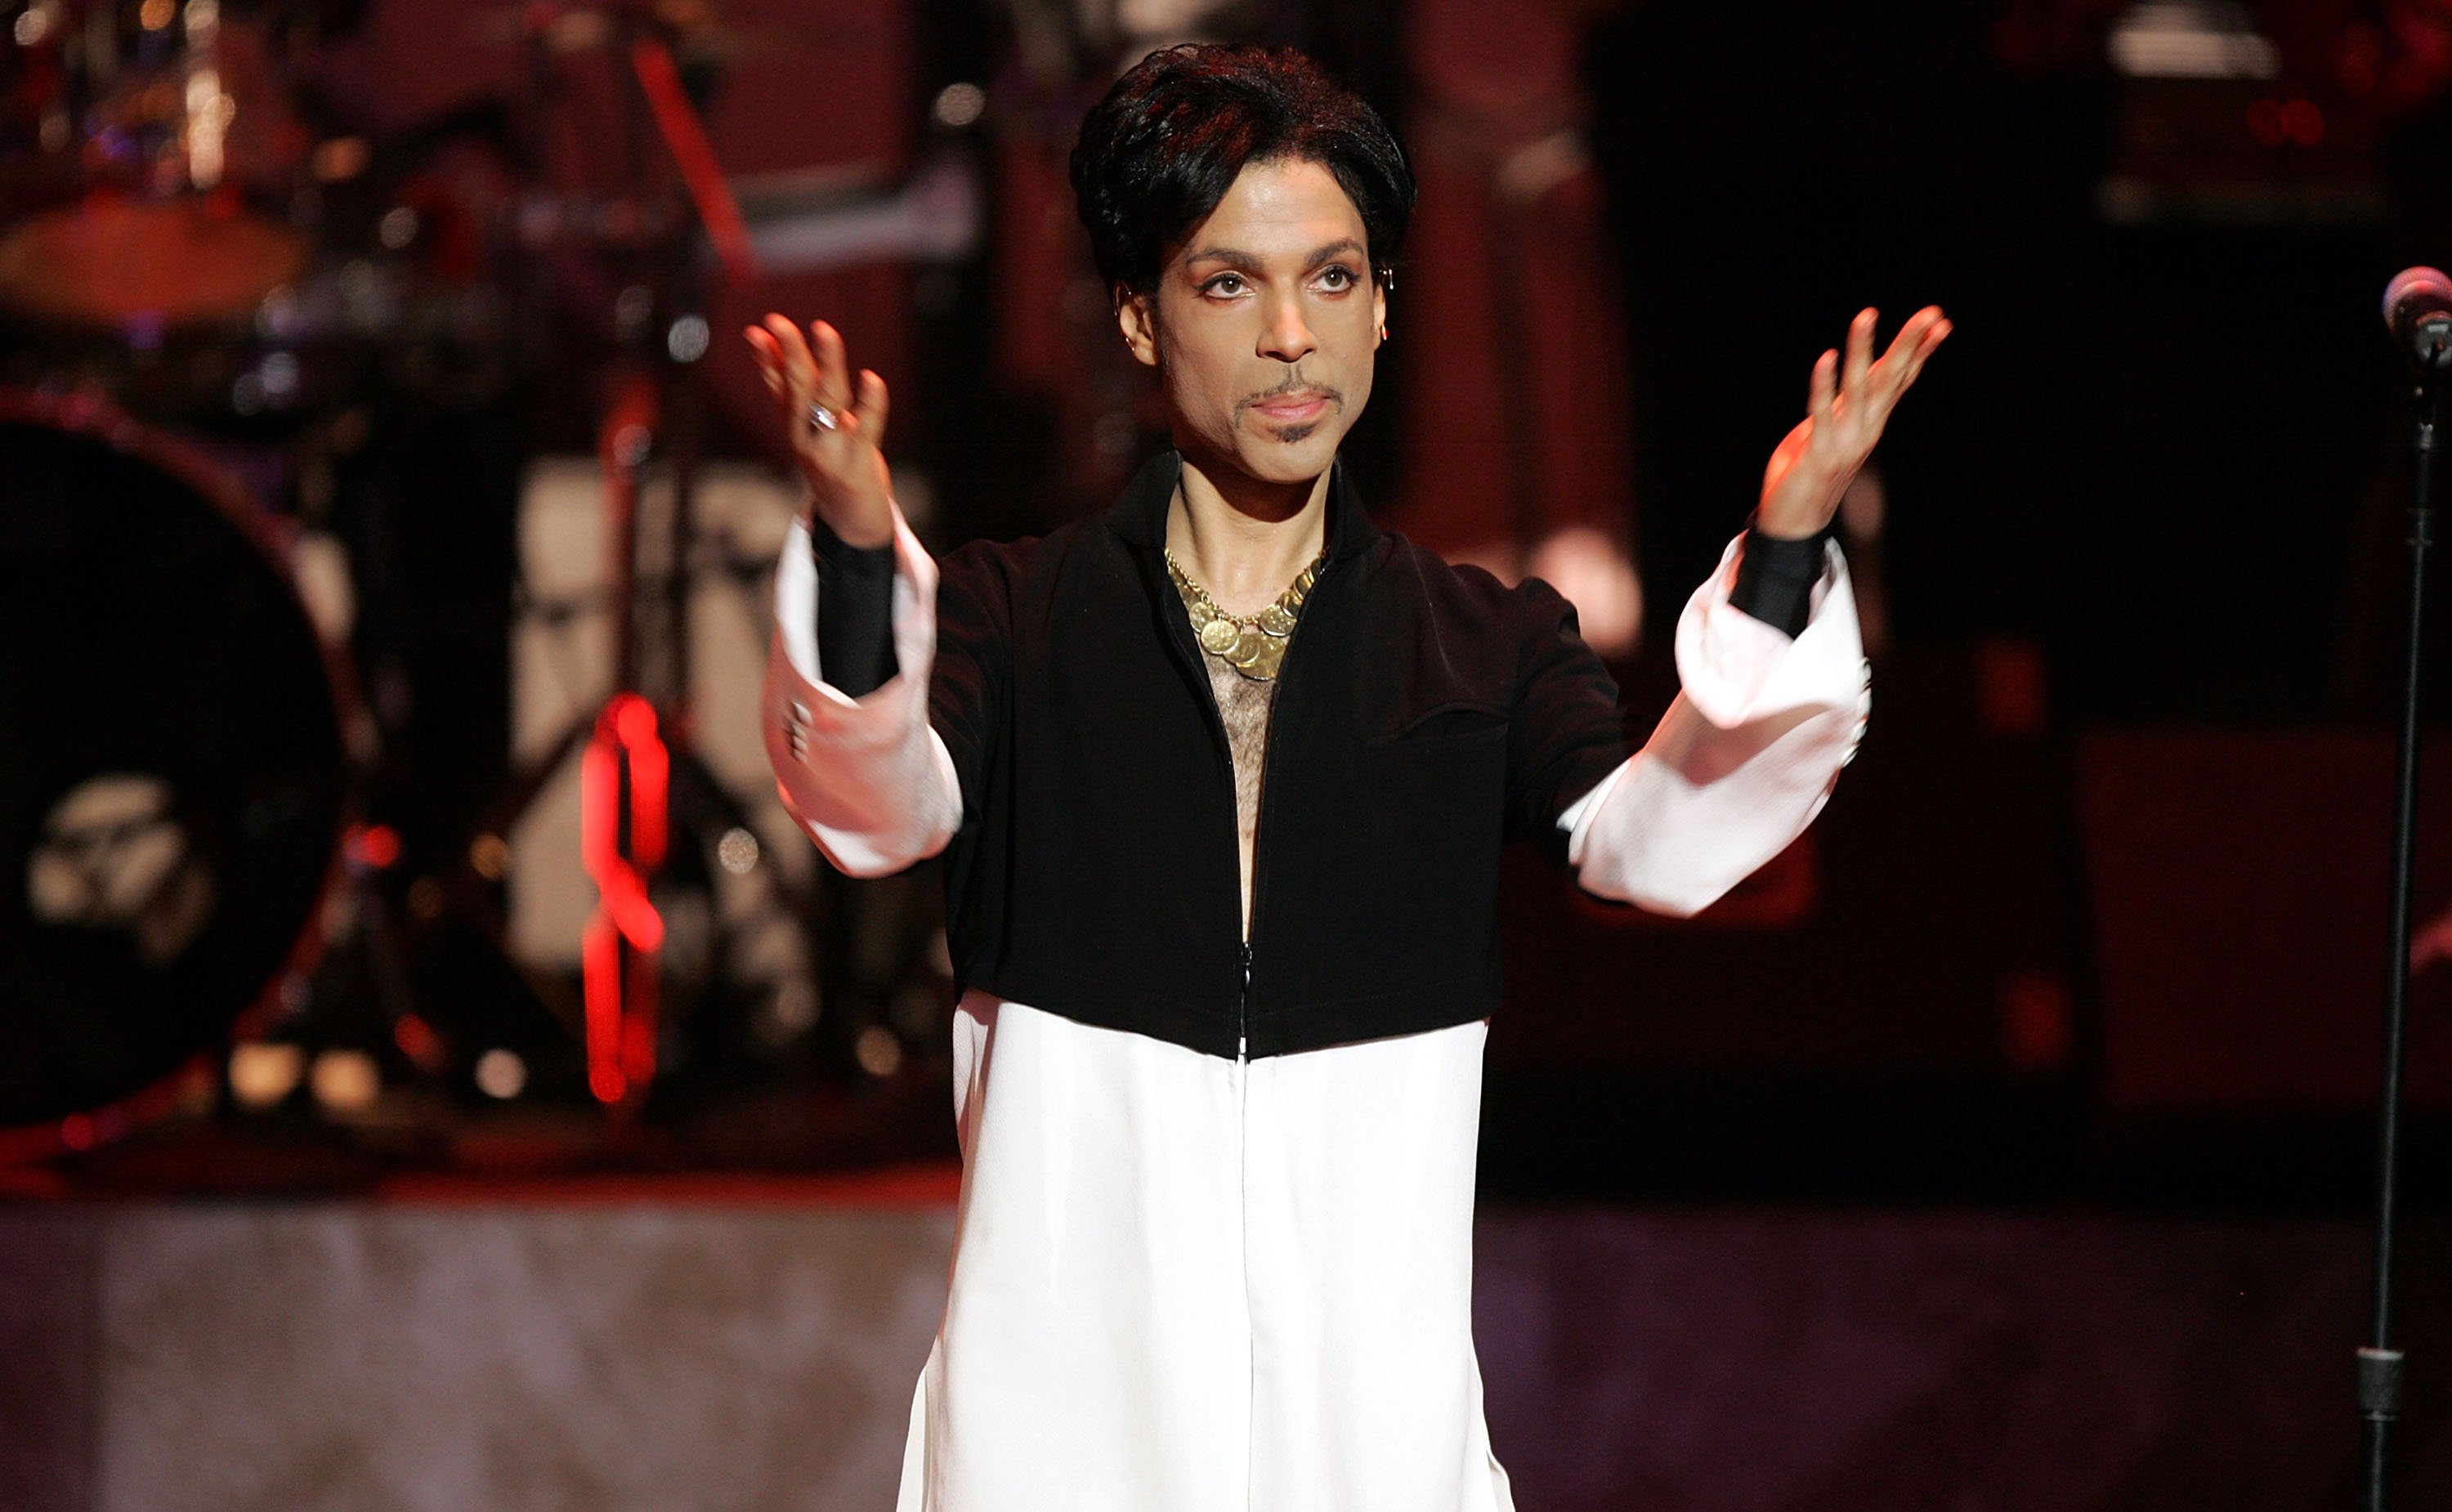  Prince is seen on stage at the 36th NAACP Image Awards at the Dorothy Chandler Pavilion on March 19, 2005 in Los Angeles, California | Photo: GettyImages